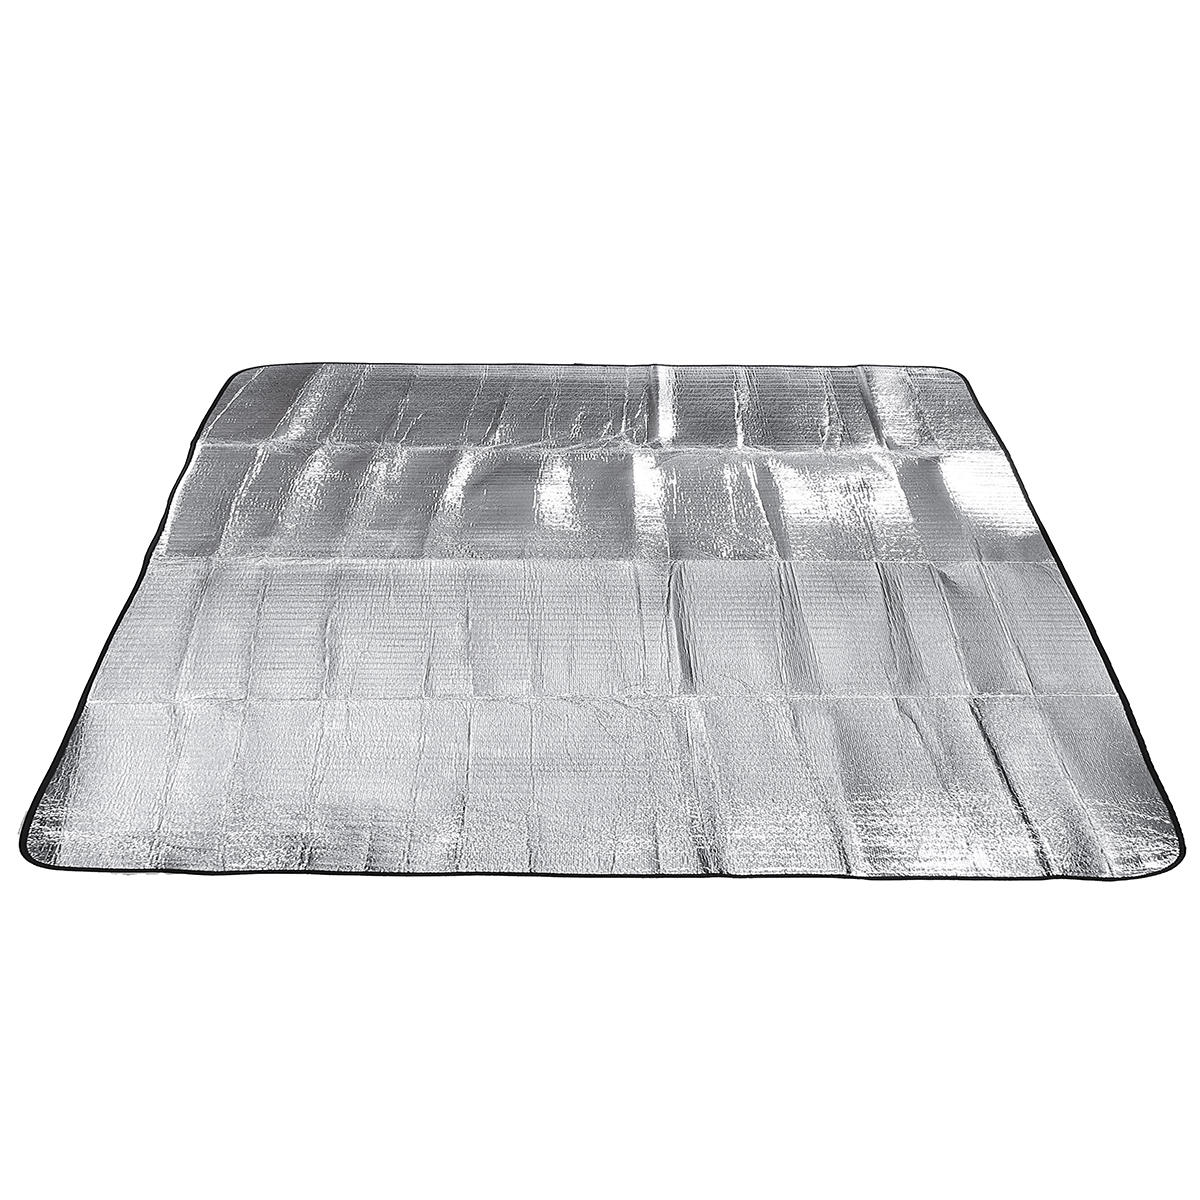 200x200CM Aluminum Foil Sleeping Pad Picnic Mat for Outdoor Camping Hiking Traveling